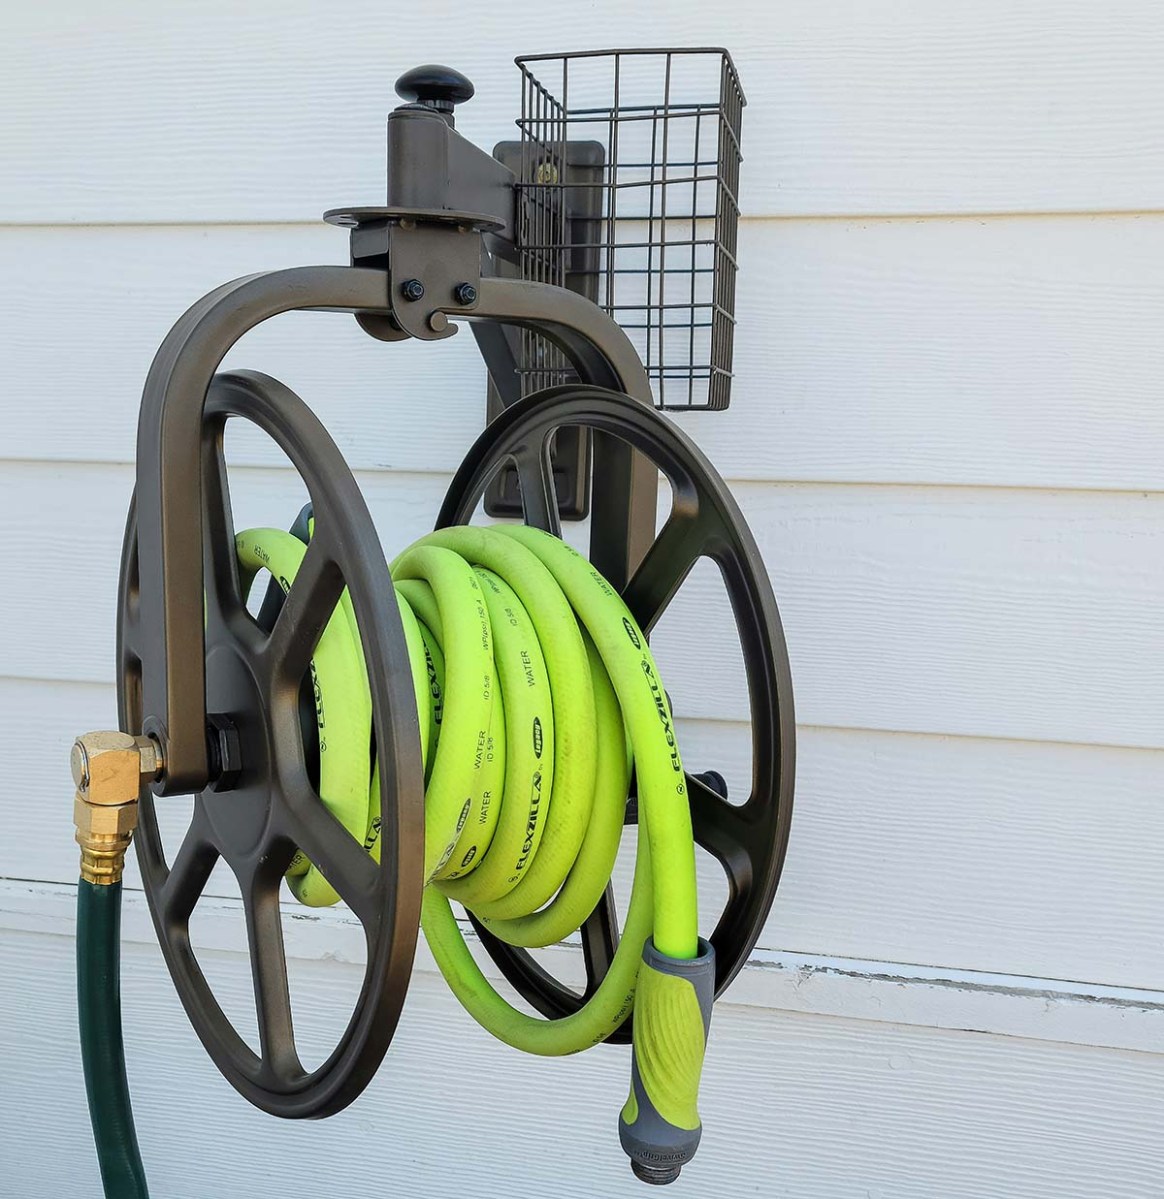 Retractable hose reel review - Easy install 